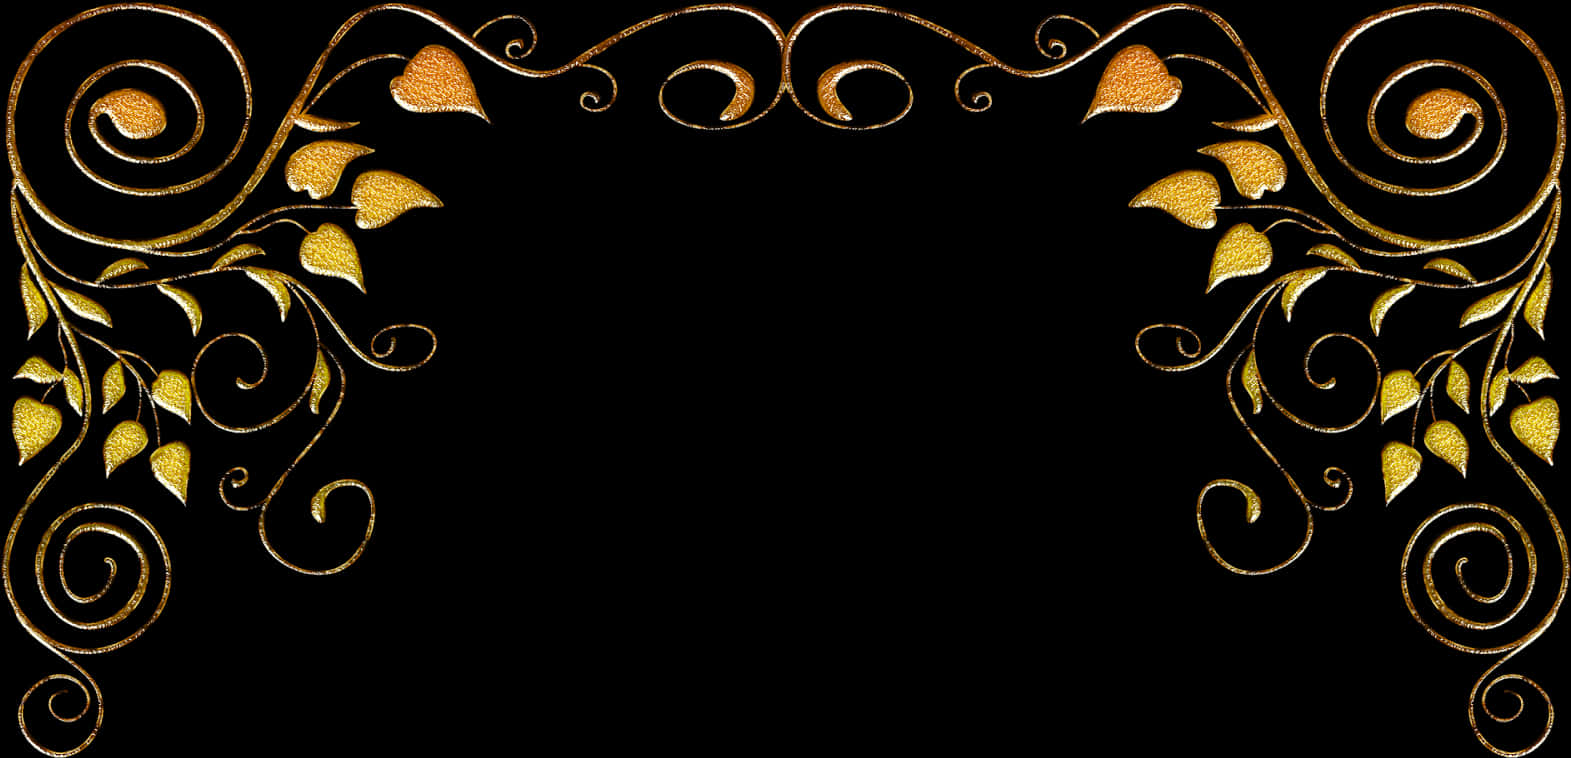 A Black Background With Gold Swirls And Leaves